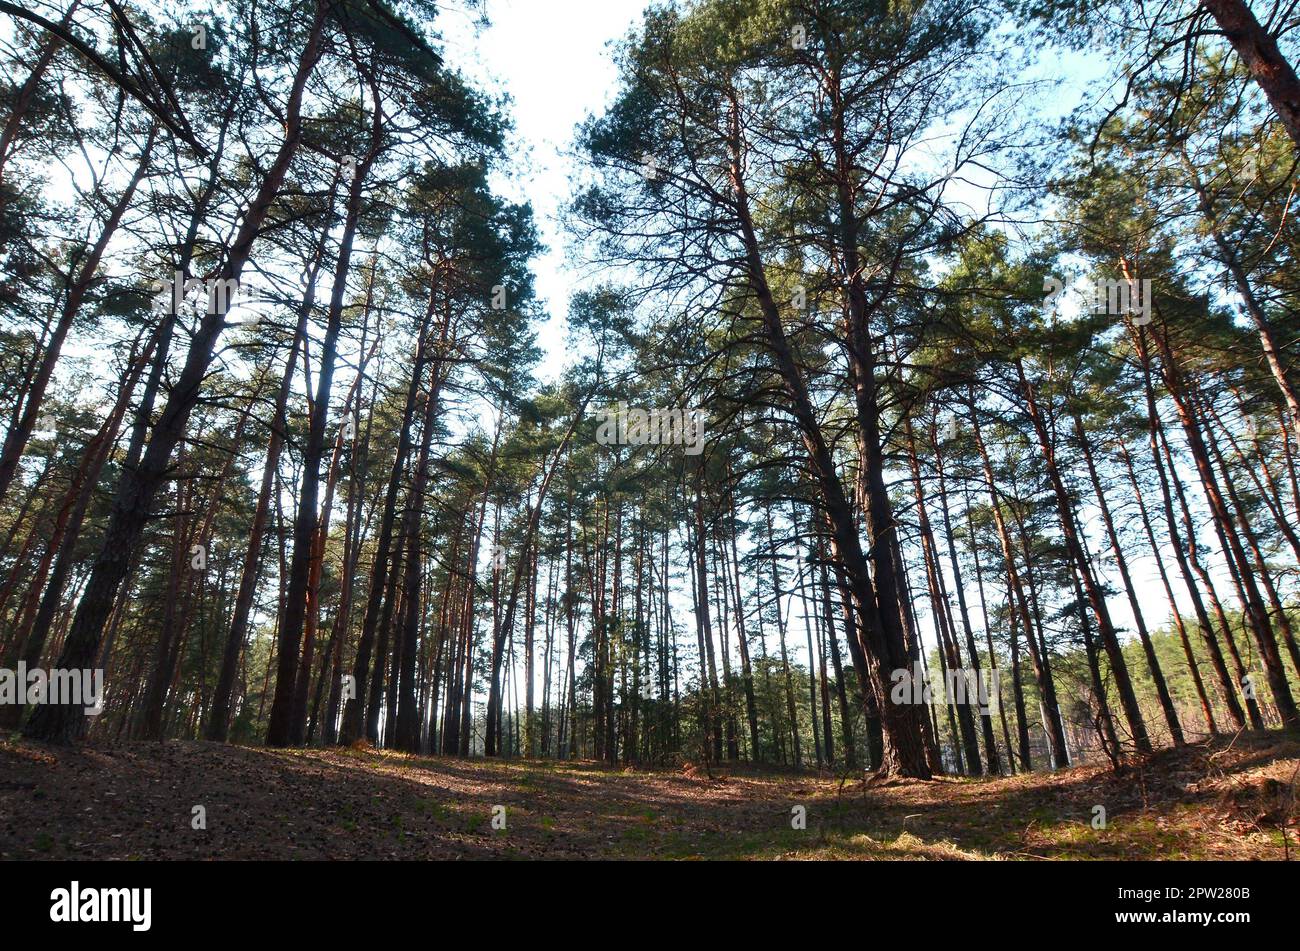 Spring sunny landscape in a pine forest in bright sunlight. Cozy forest space among the pines, dotted with fallen cones and coniferous needles Stock Photo